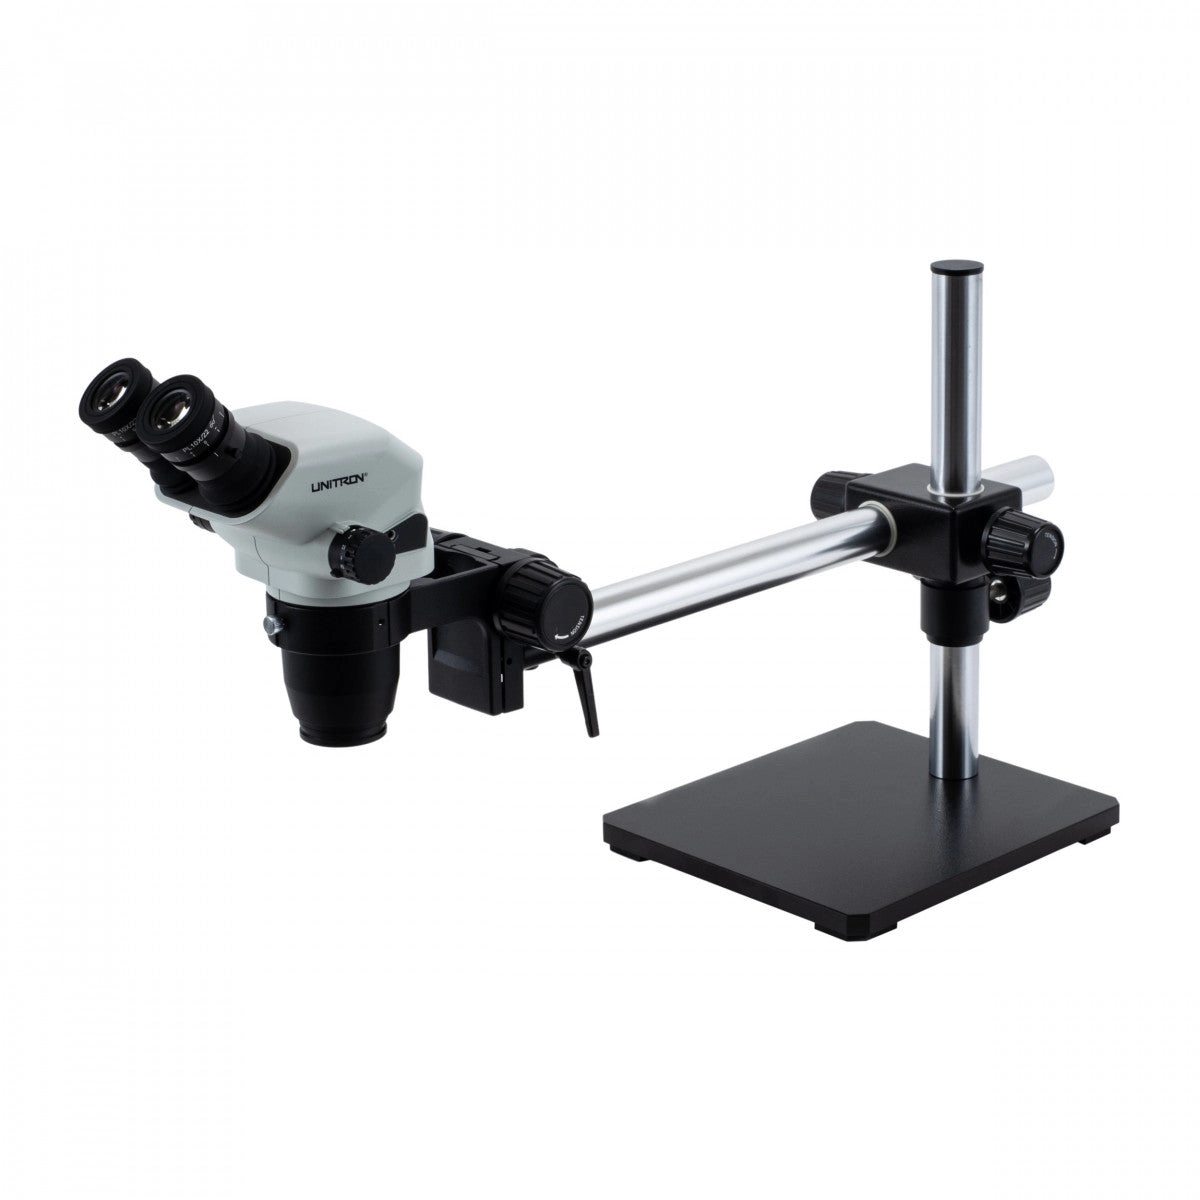 Unitron Z645 Zoom Stereo Microscope on Boom Stand | Industrial part inspection